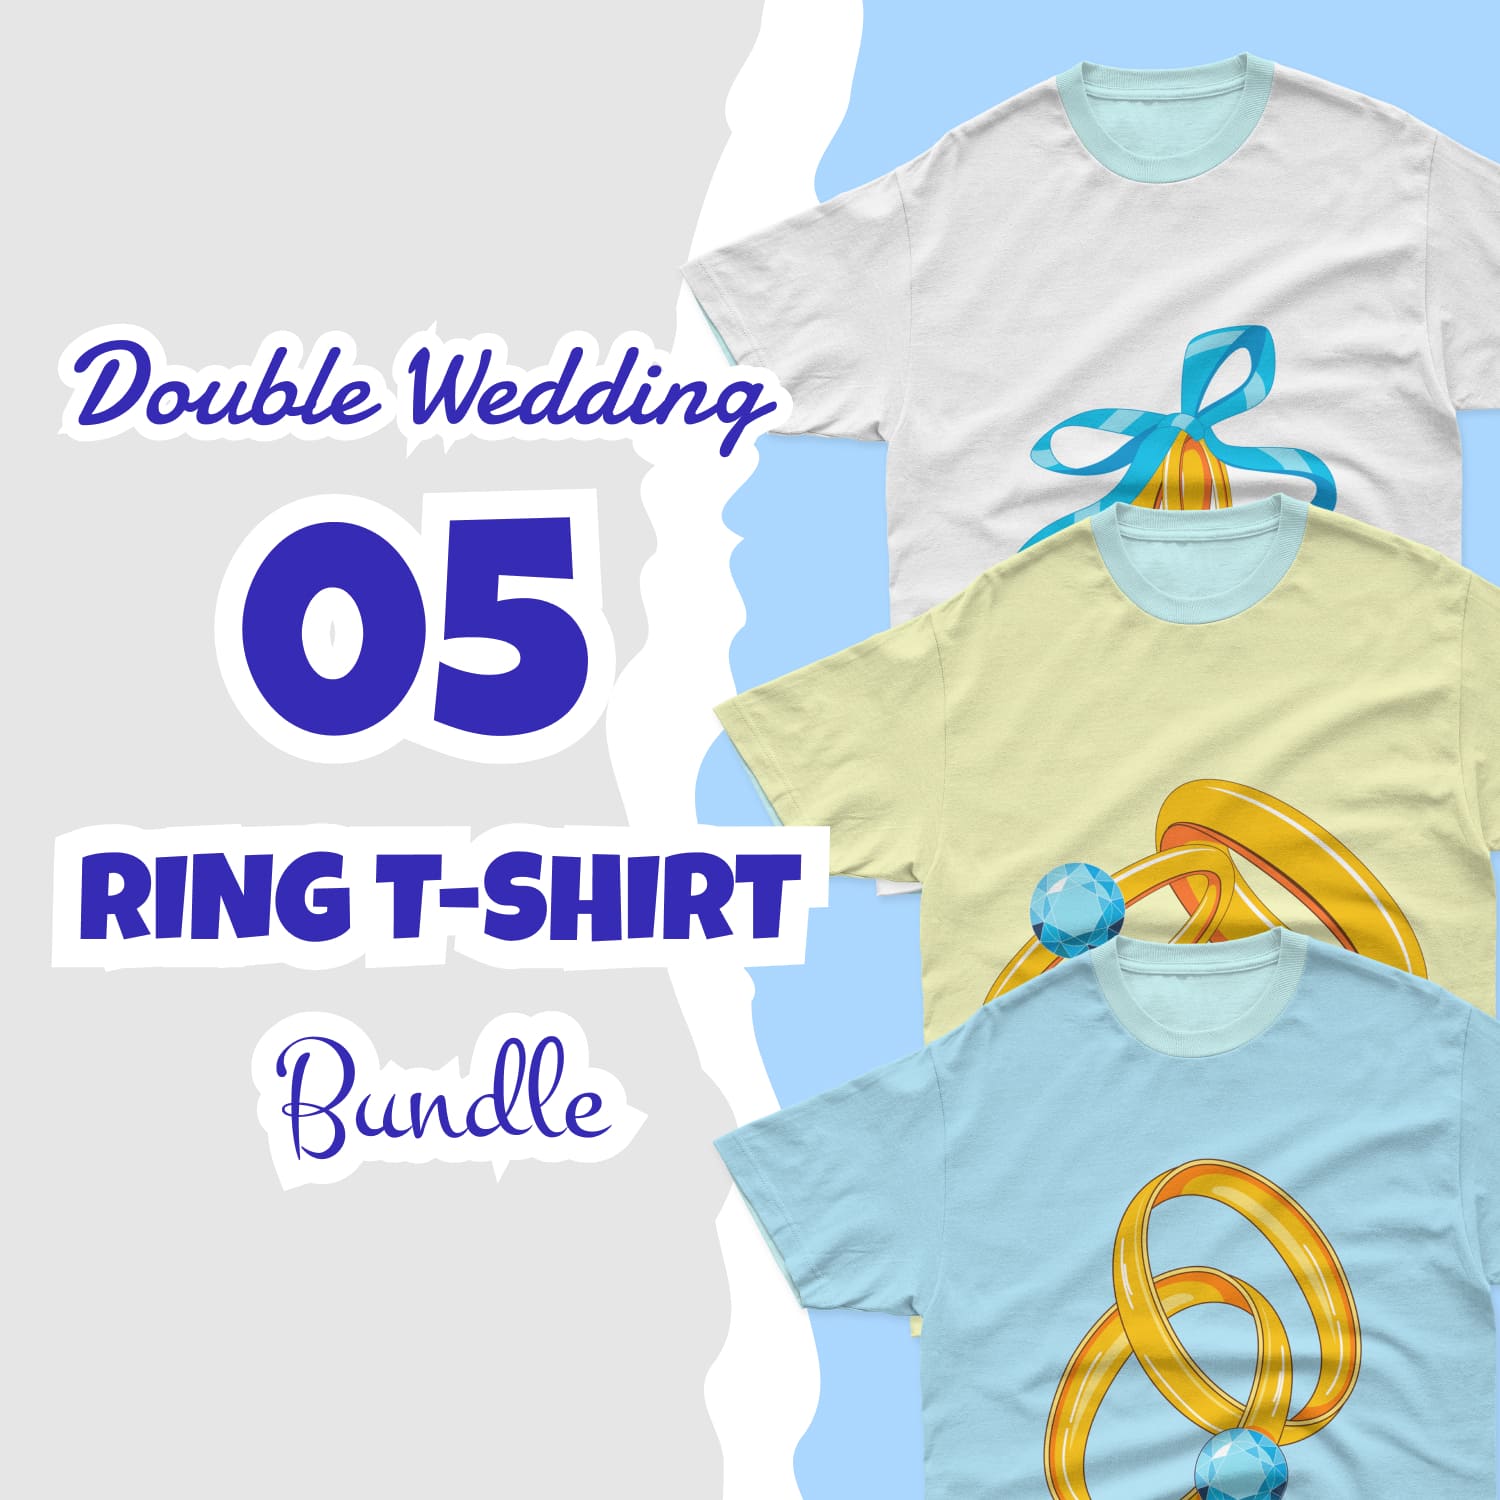 Collection of images of t-shirts with enchanting prints of wedding rings.